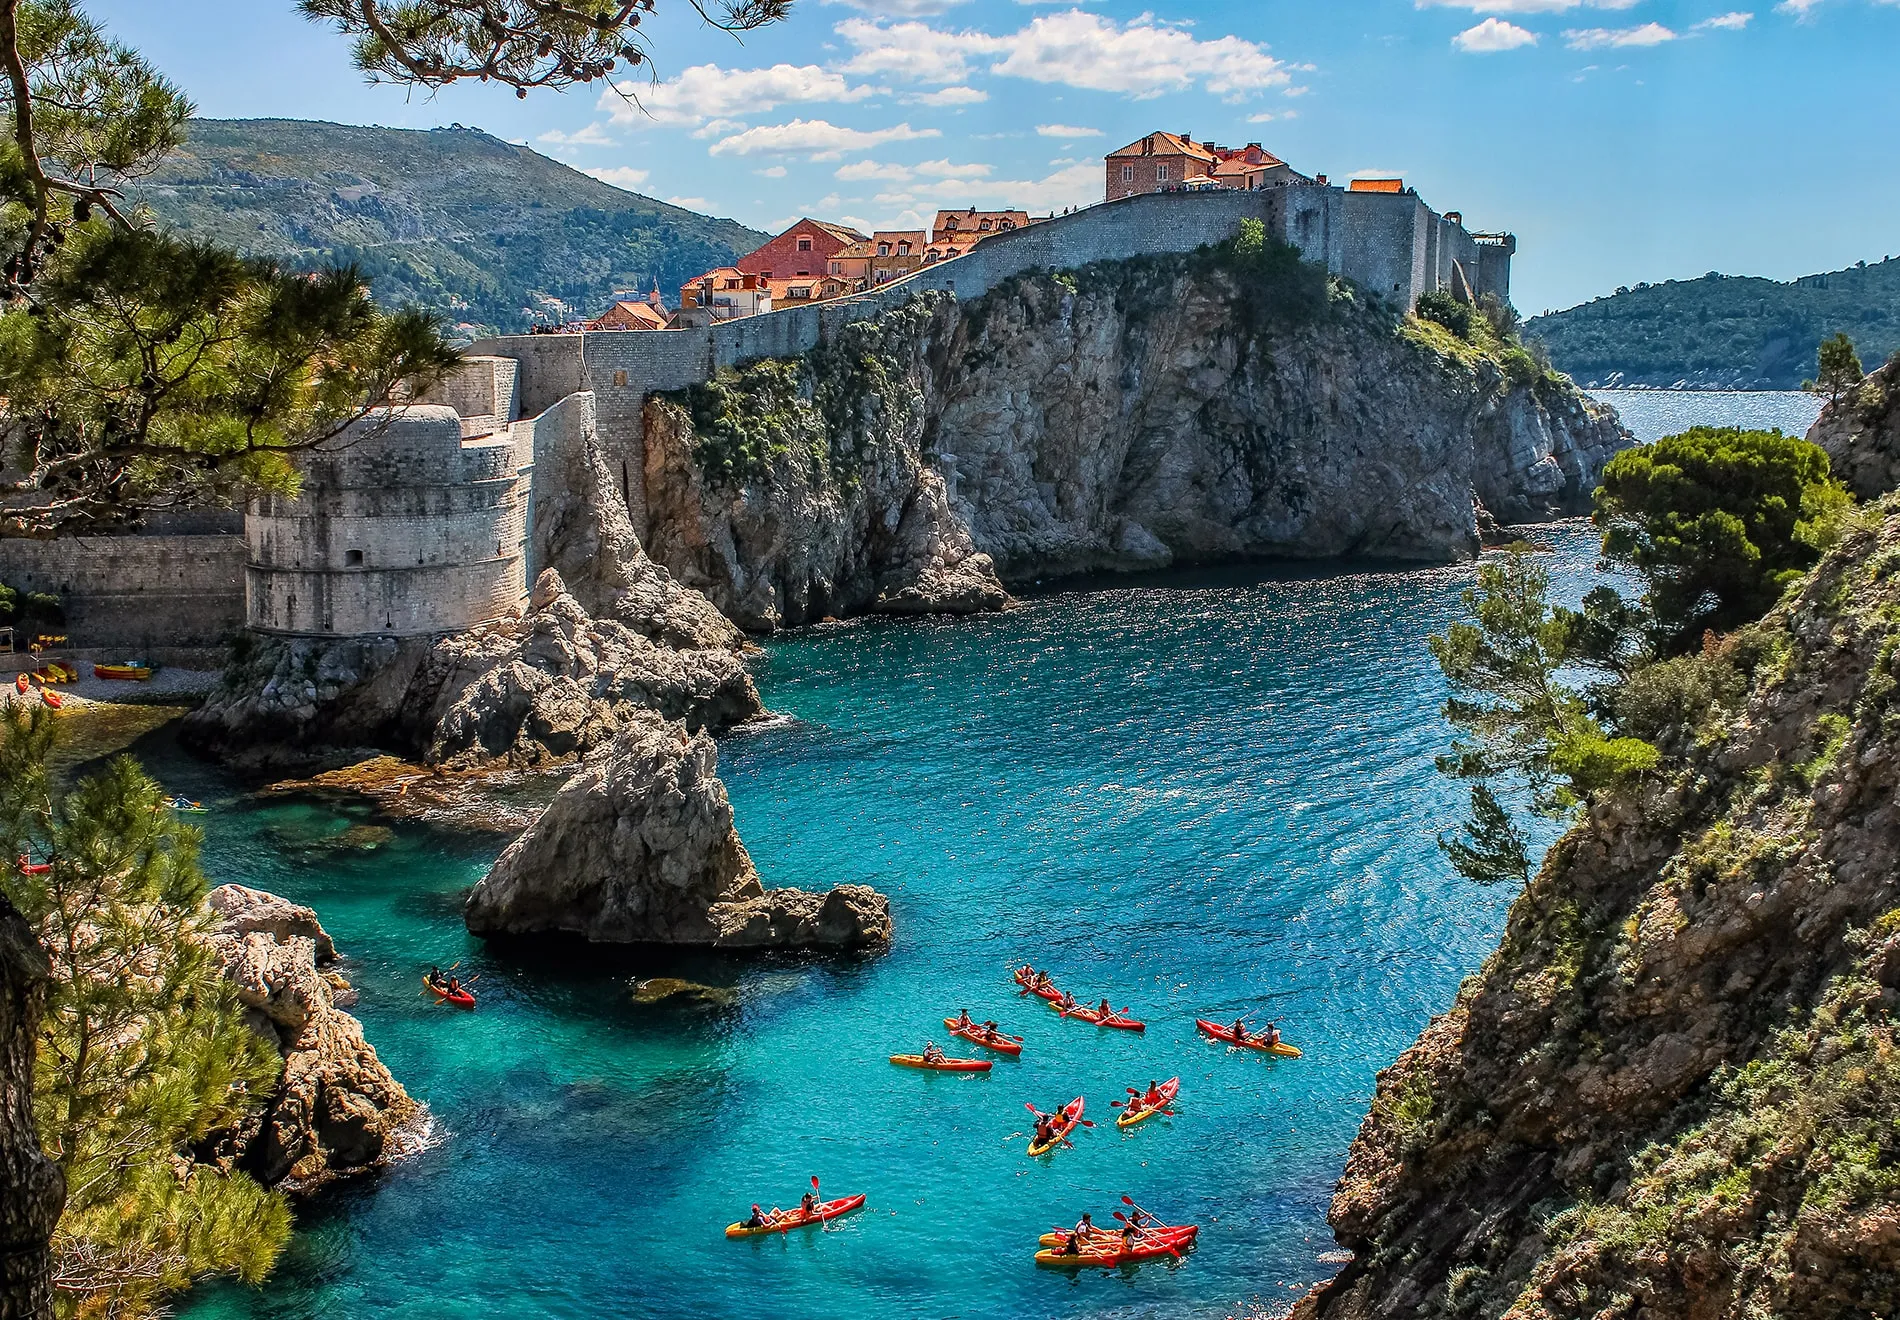 1. Explore Dubrovnik’s Old Town